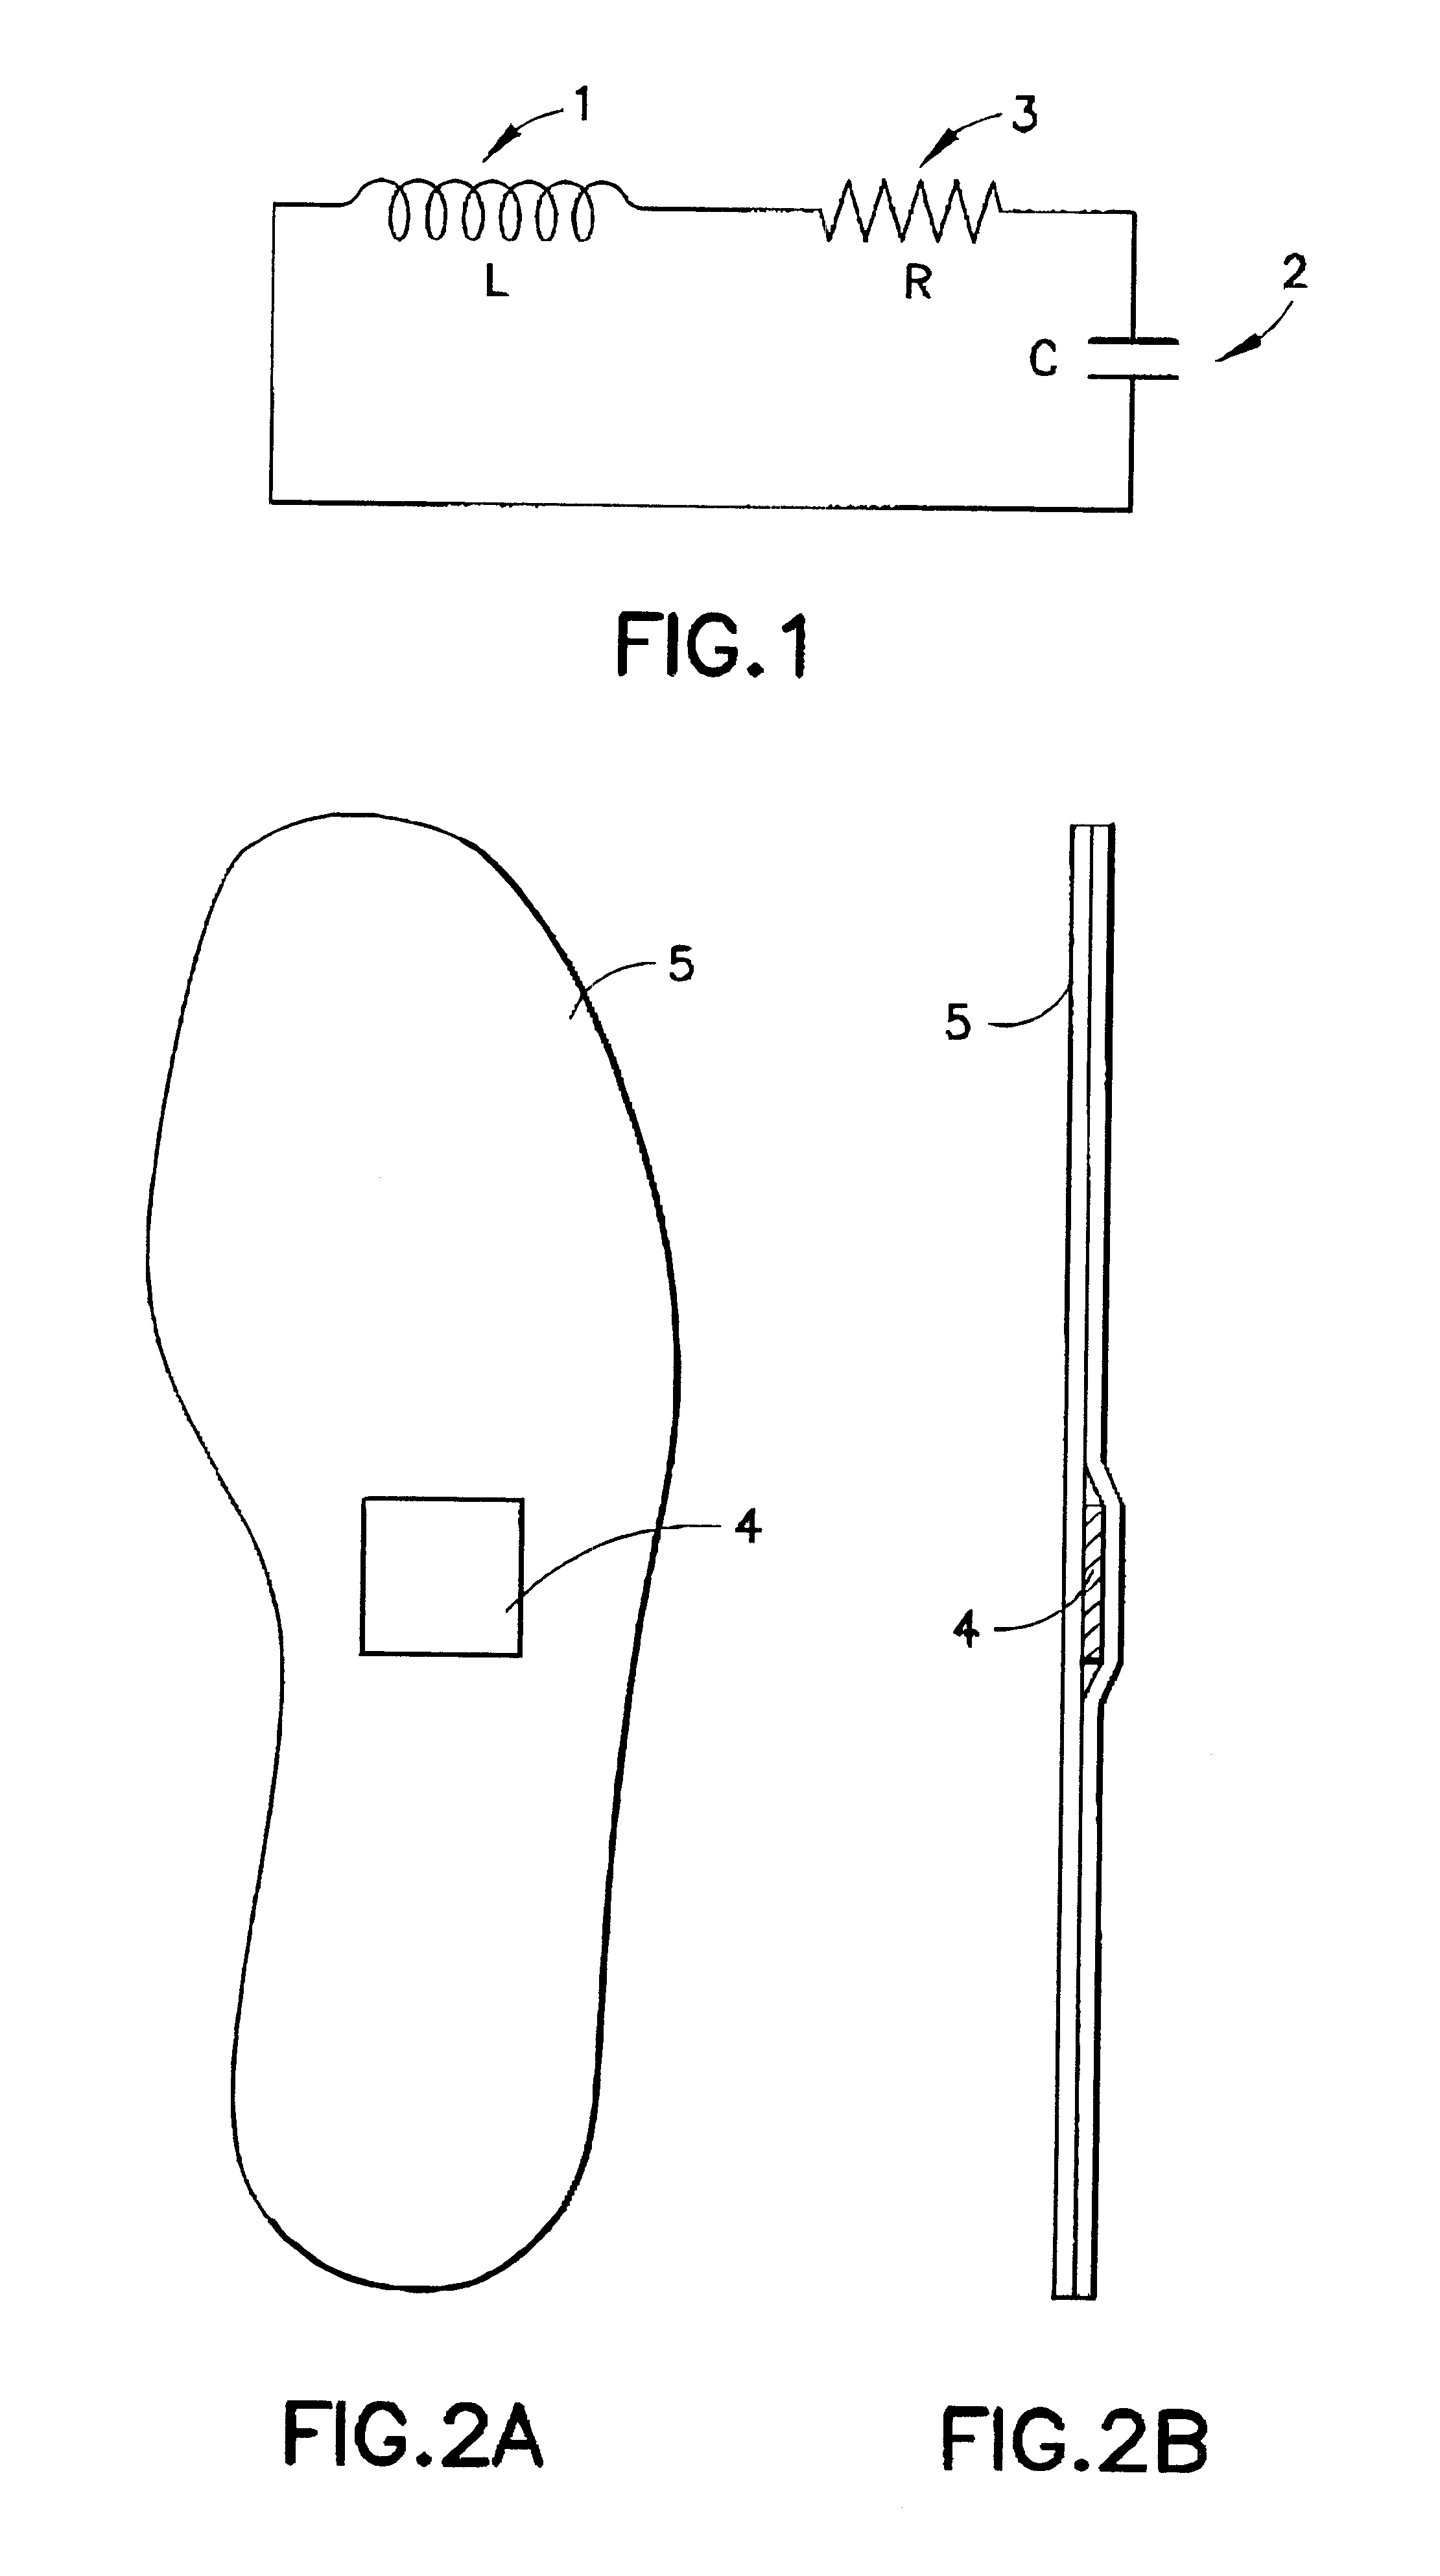 Method and apparatus for electromagnetic stimulation of the skin for treating pathological conditions